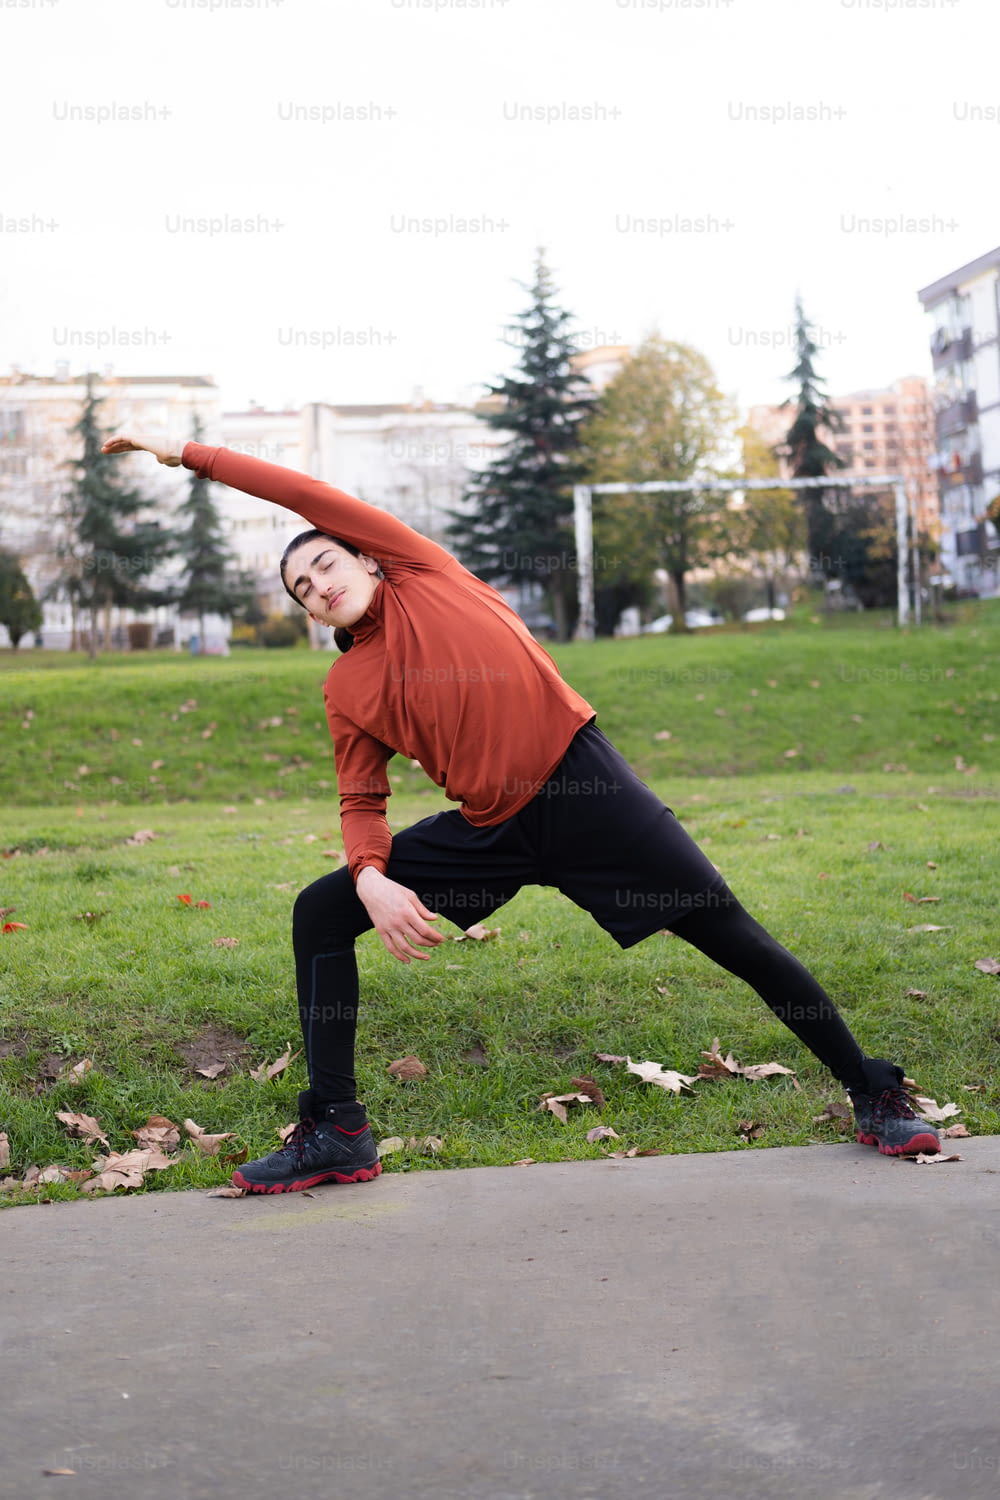 a man in a red shirt is doing a yoga pose